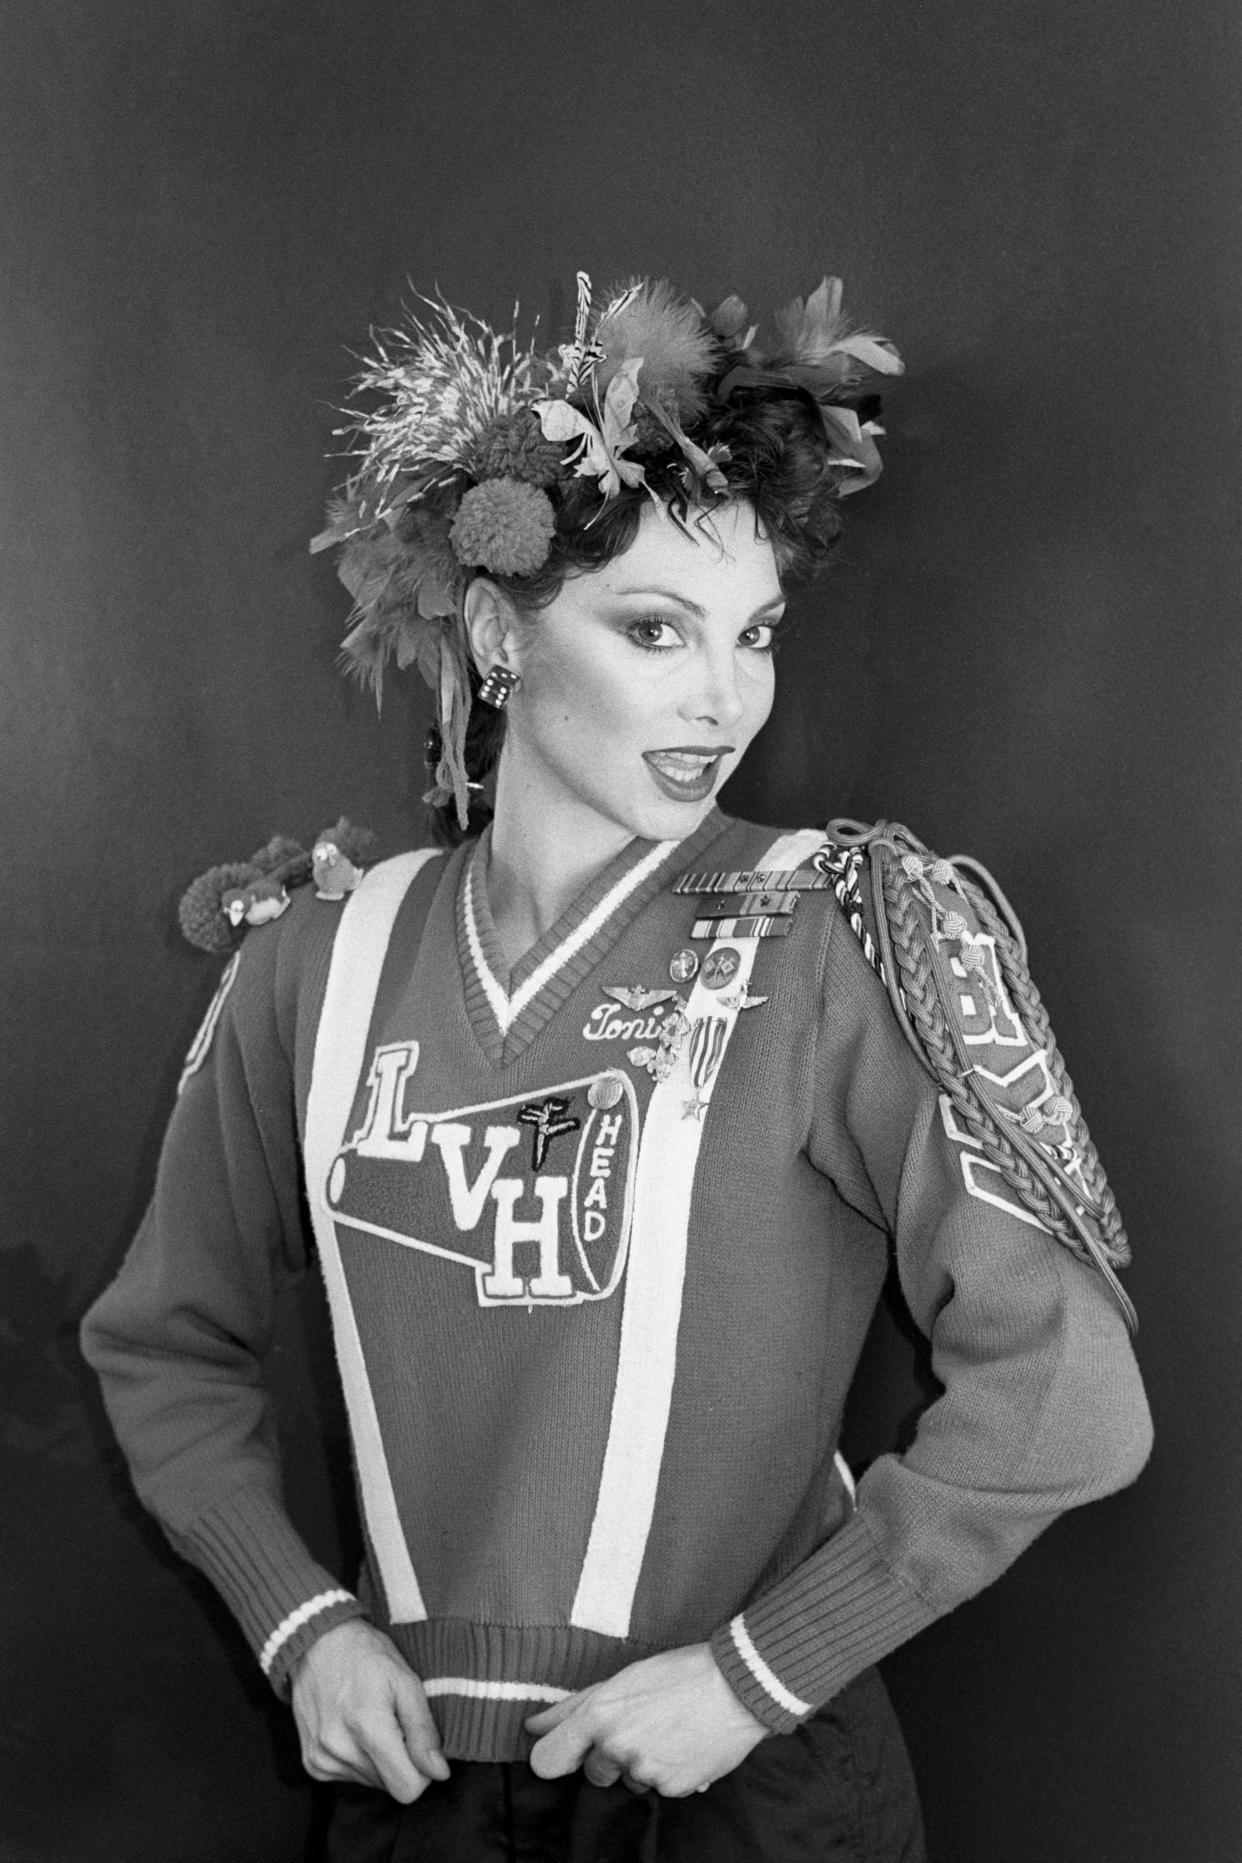 Toni Basil, seen back in the day, can still dance up a storm at age 74, a video circulating on Twitter shows. (Photo: PA Archive/PA Images)